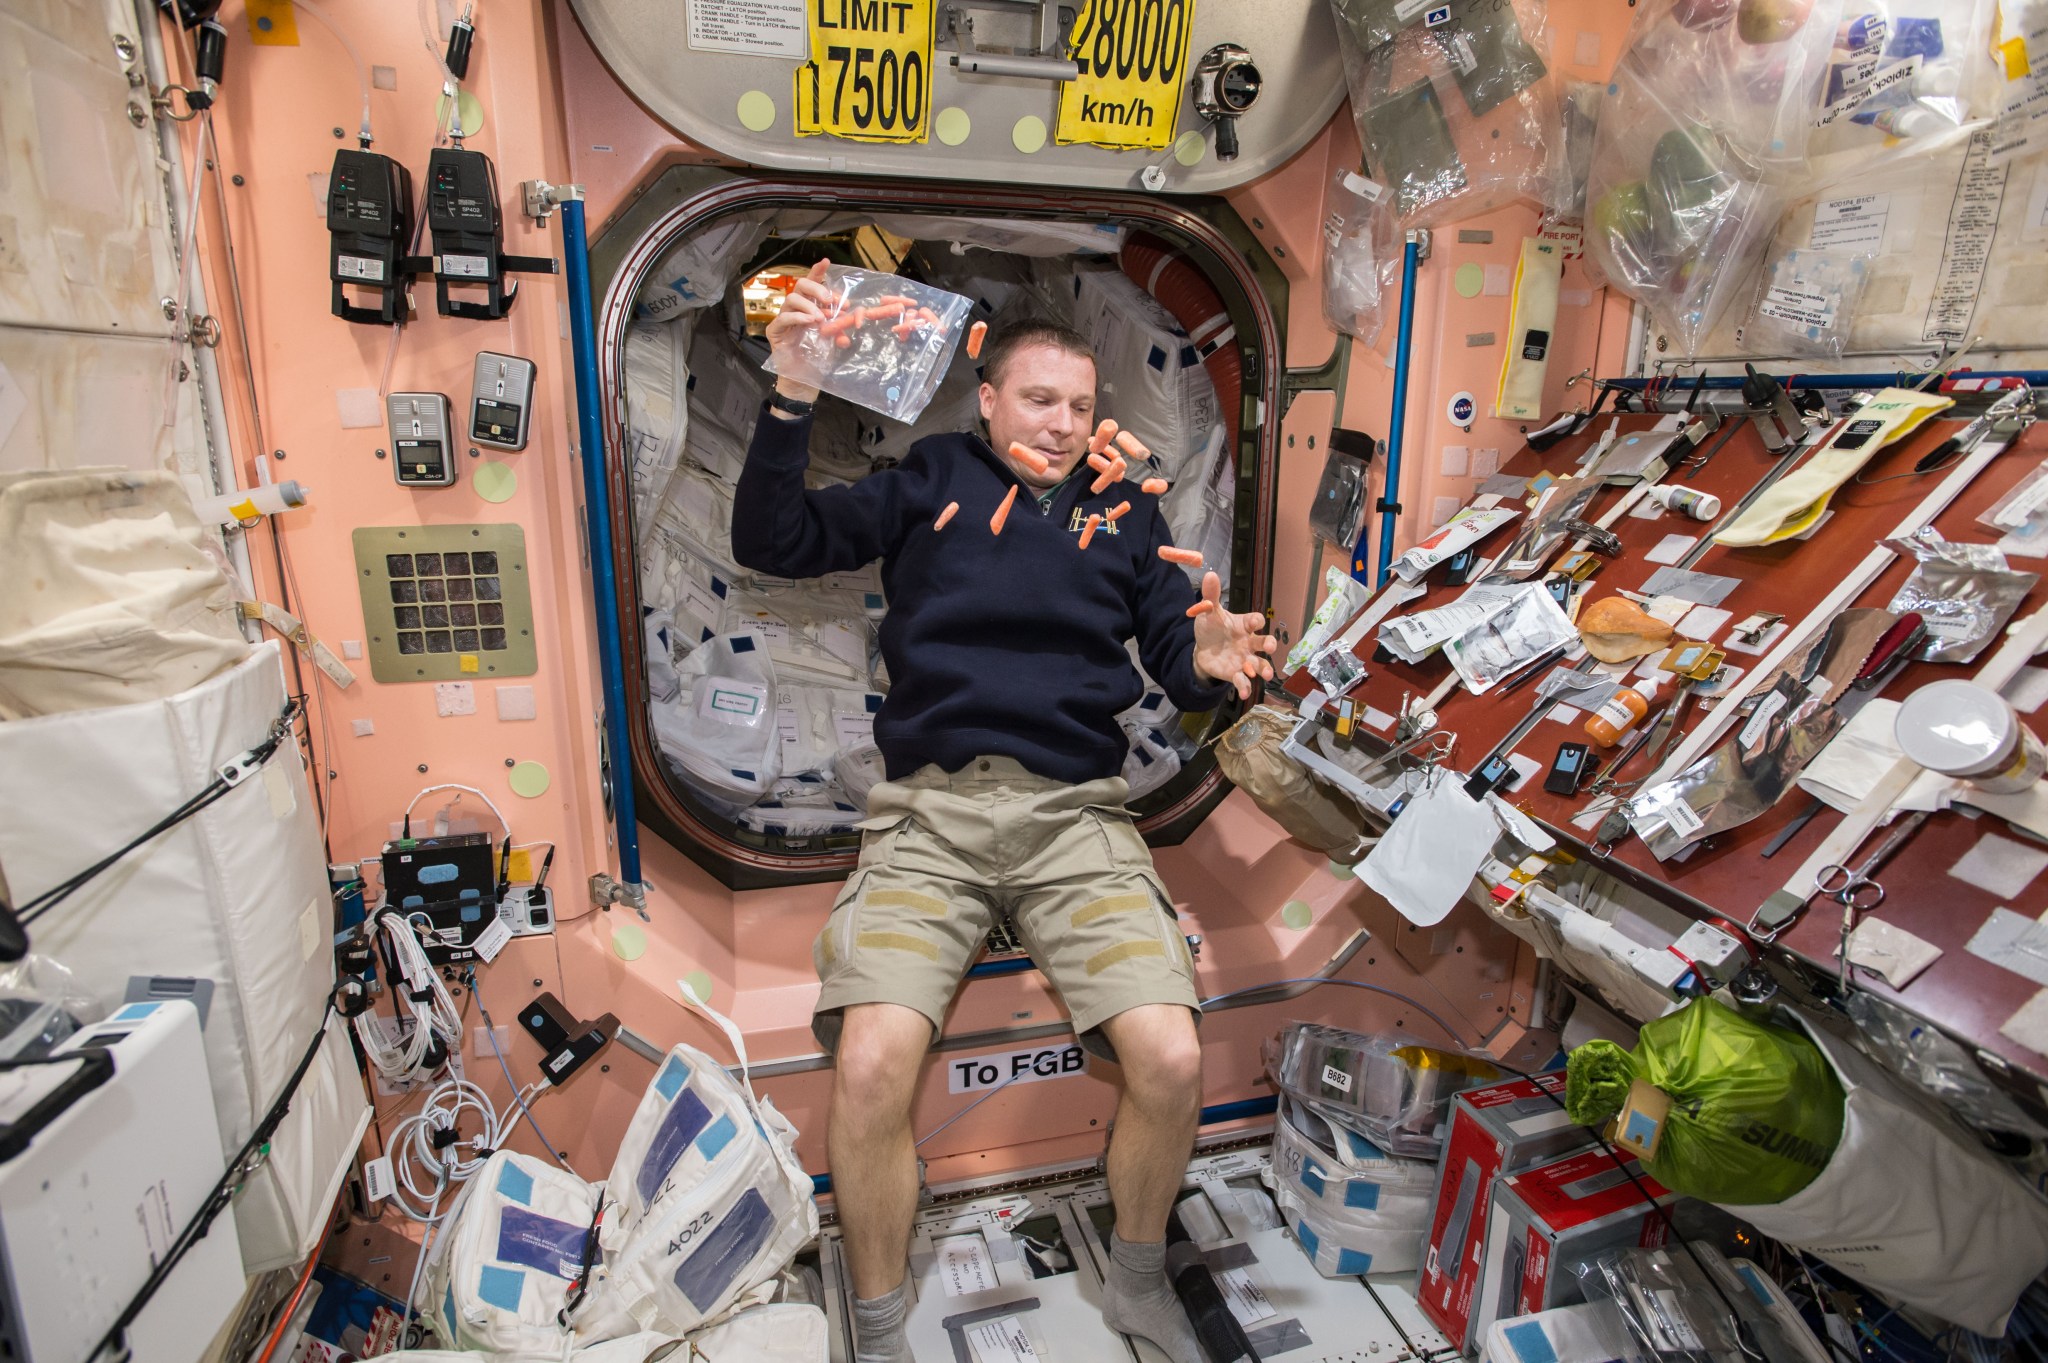 Expedition 43 Commander Terry Virts opens a packet of carrots on the space station